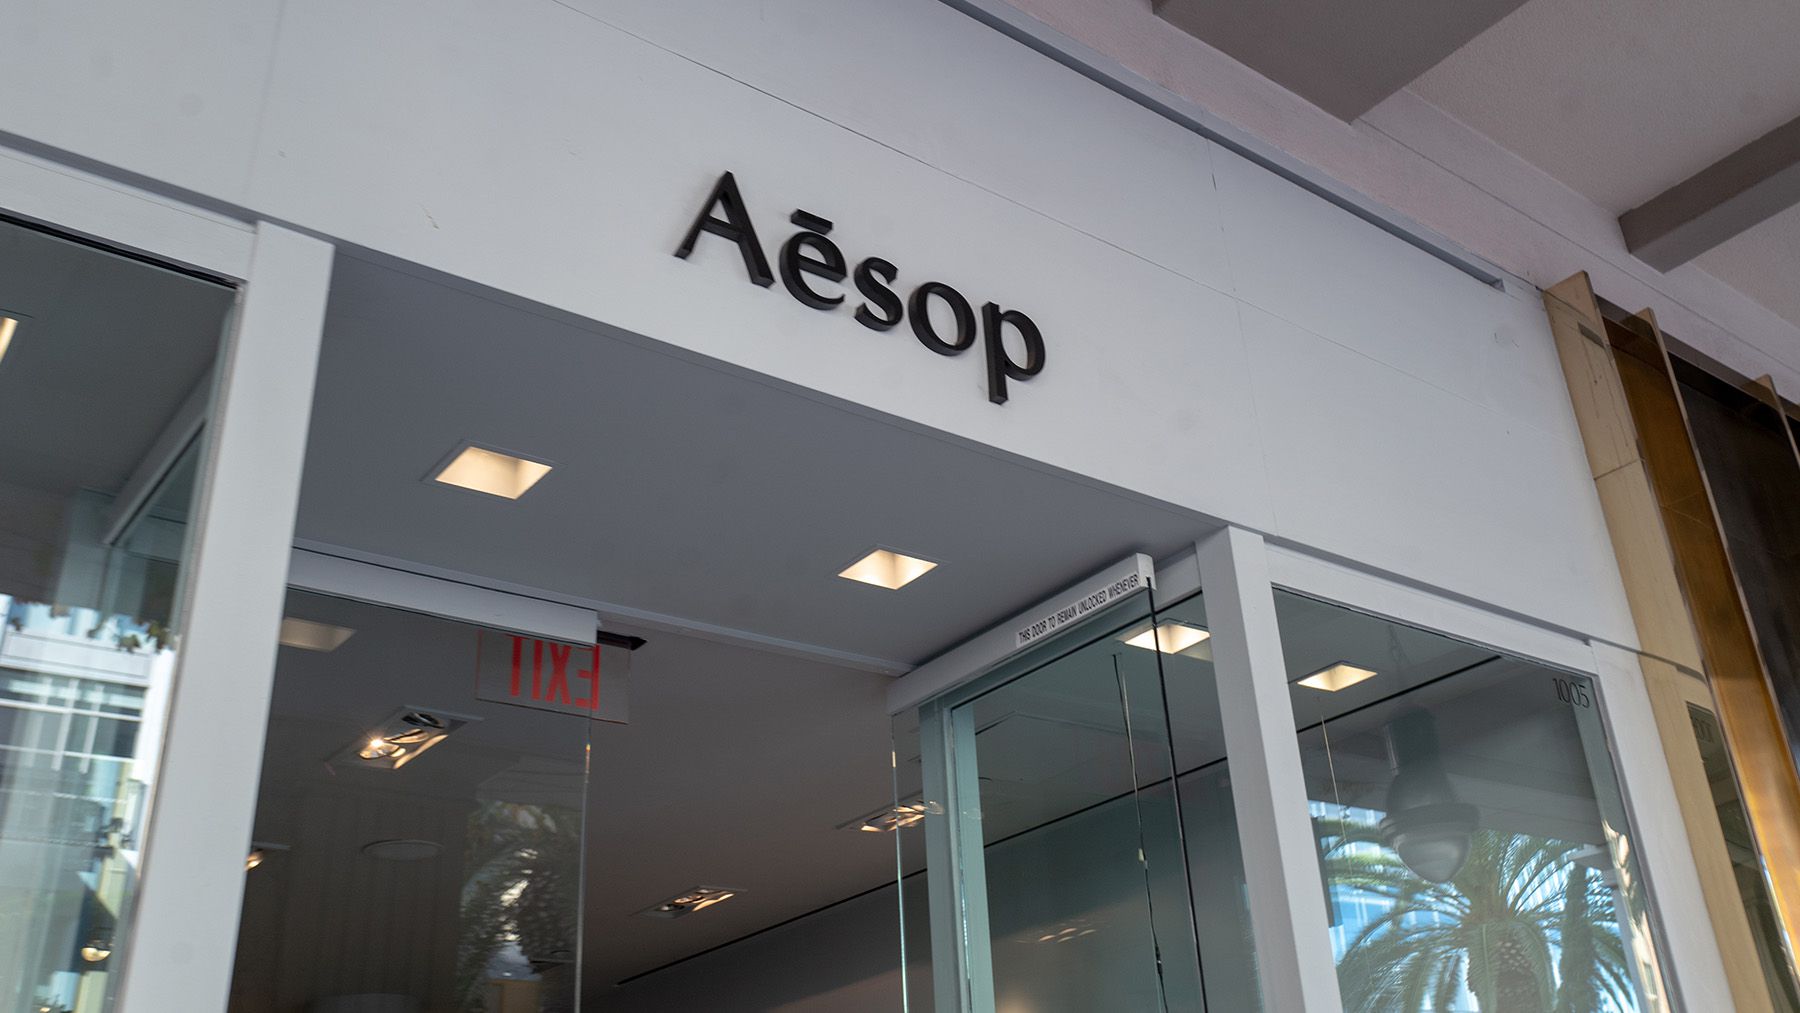 L’Oreal, Permira Among Firms Competing for Aesop Stake